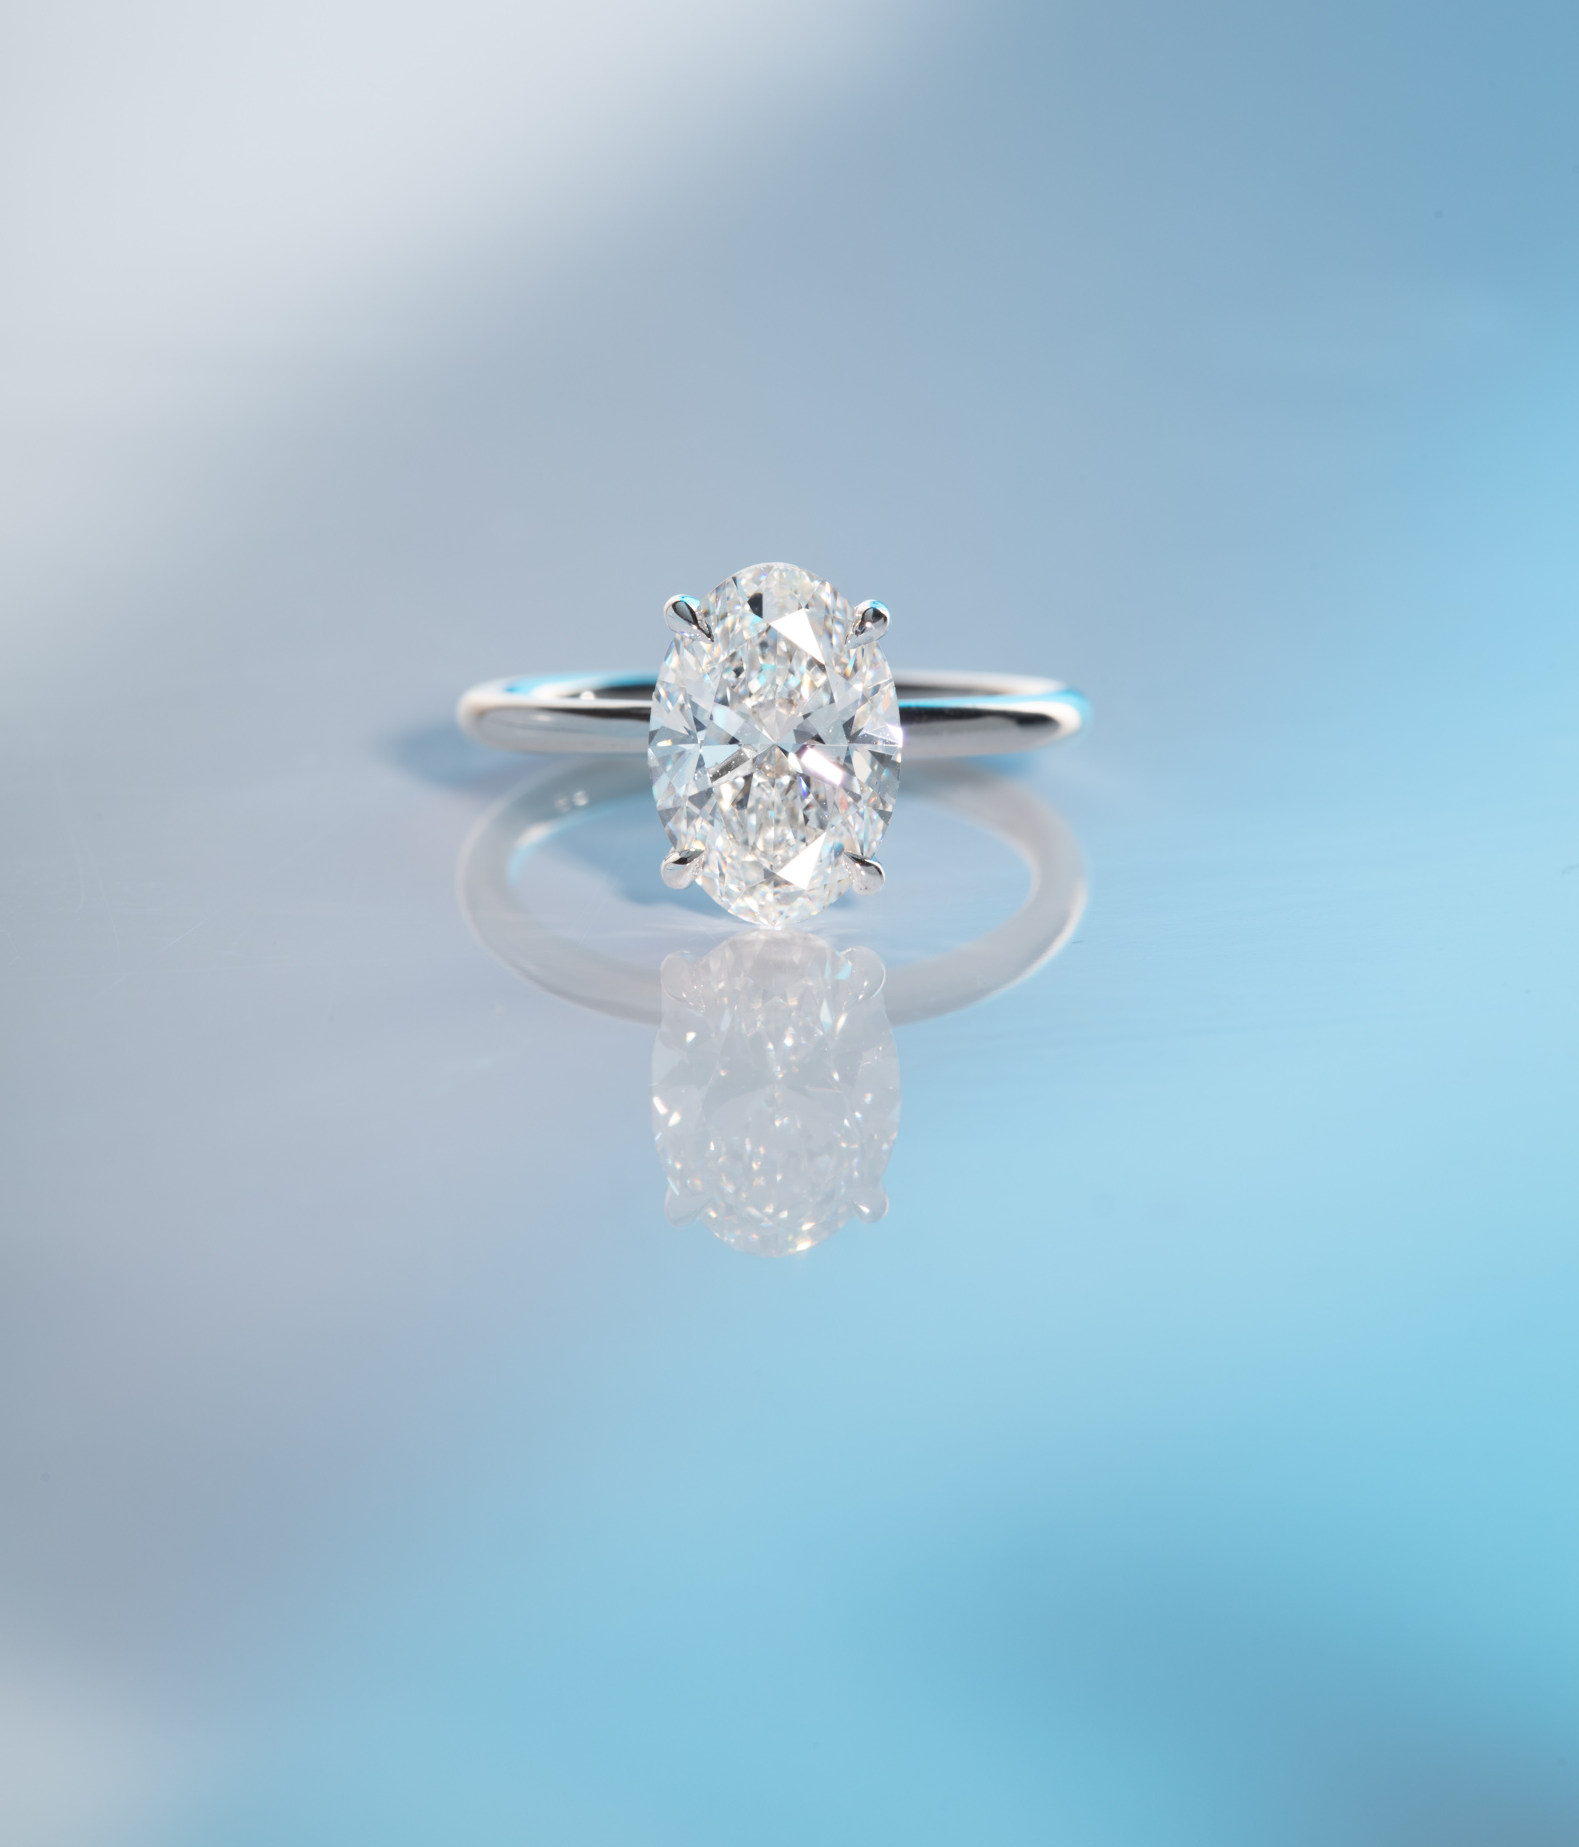 Or & Elle Engagement Suite. A custom 2.5 oval diamond engagement ring with a thin 18K White Gold and Palladium band. Or & Elle specializes in creating any custom engagement ring - using superlative diamonds and 18K recycled gold.